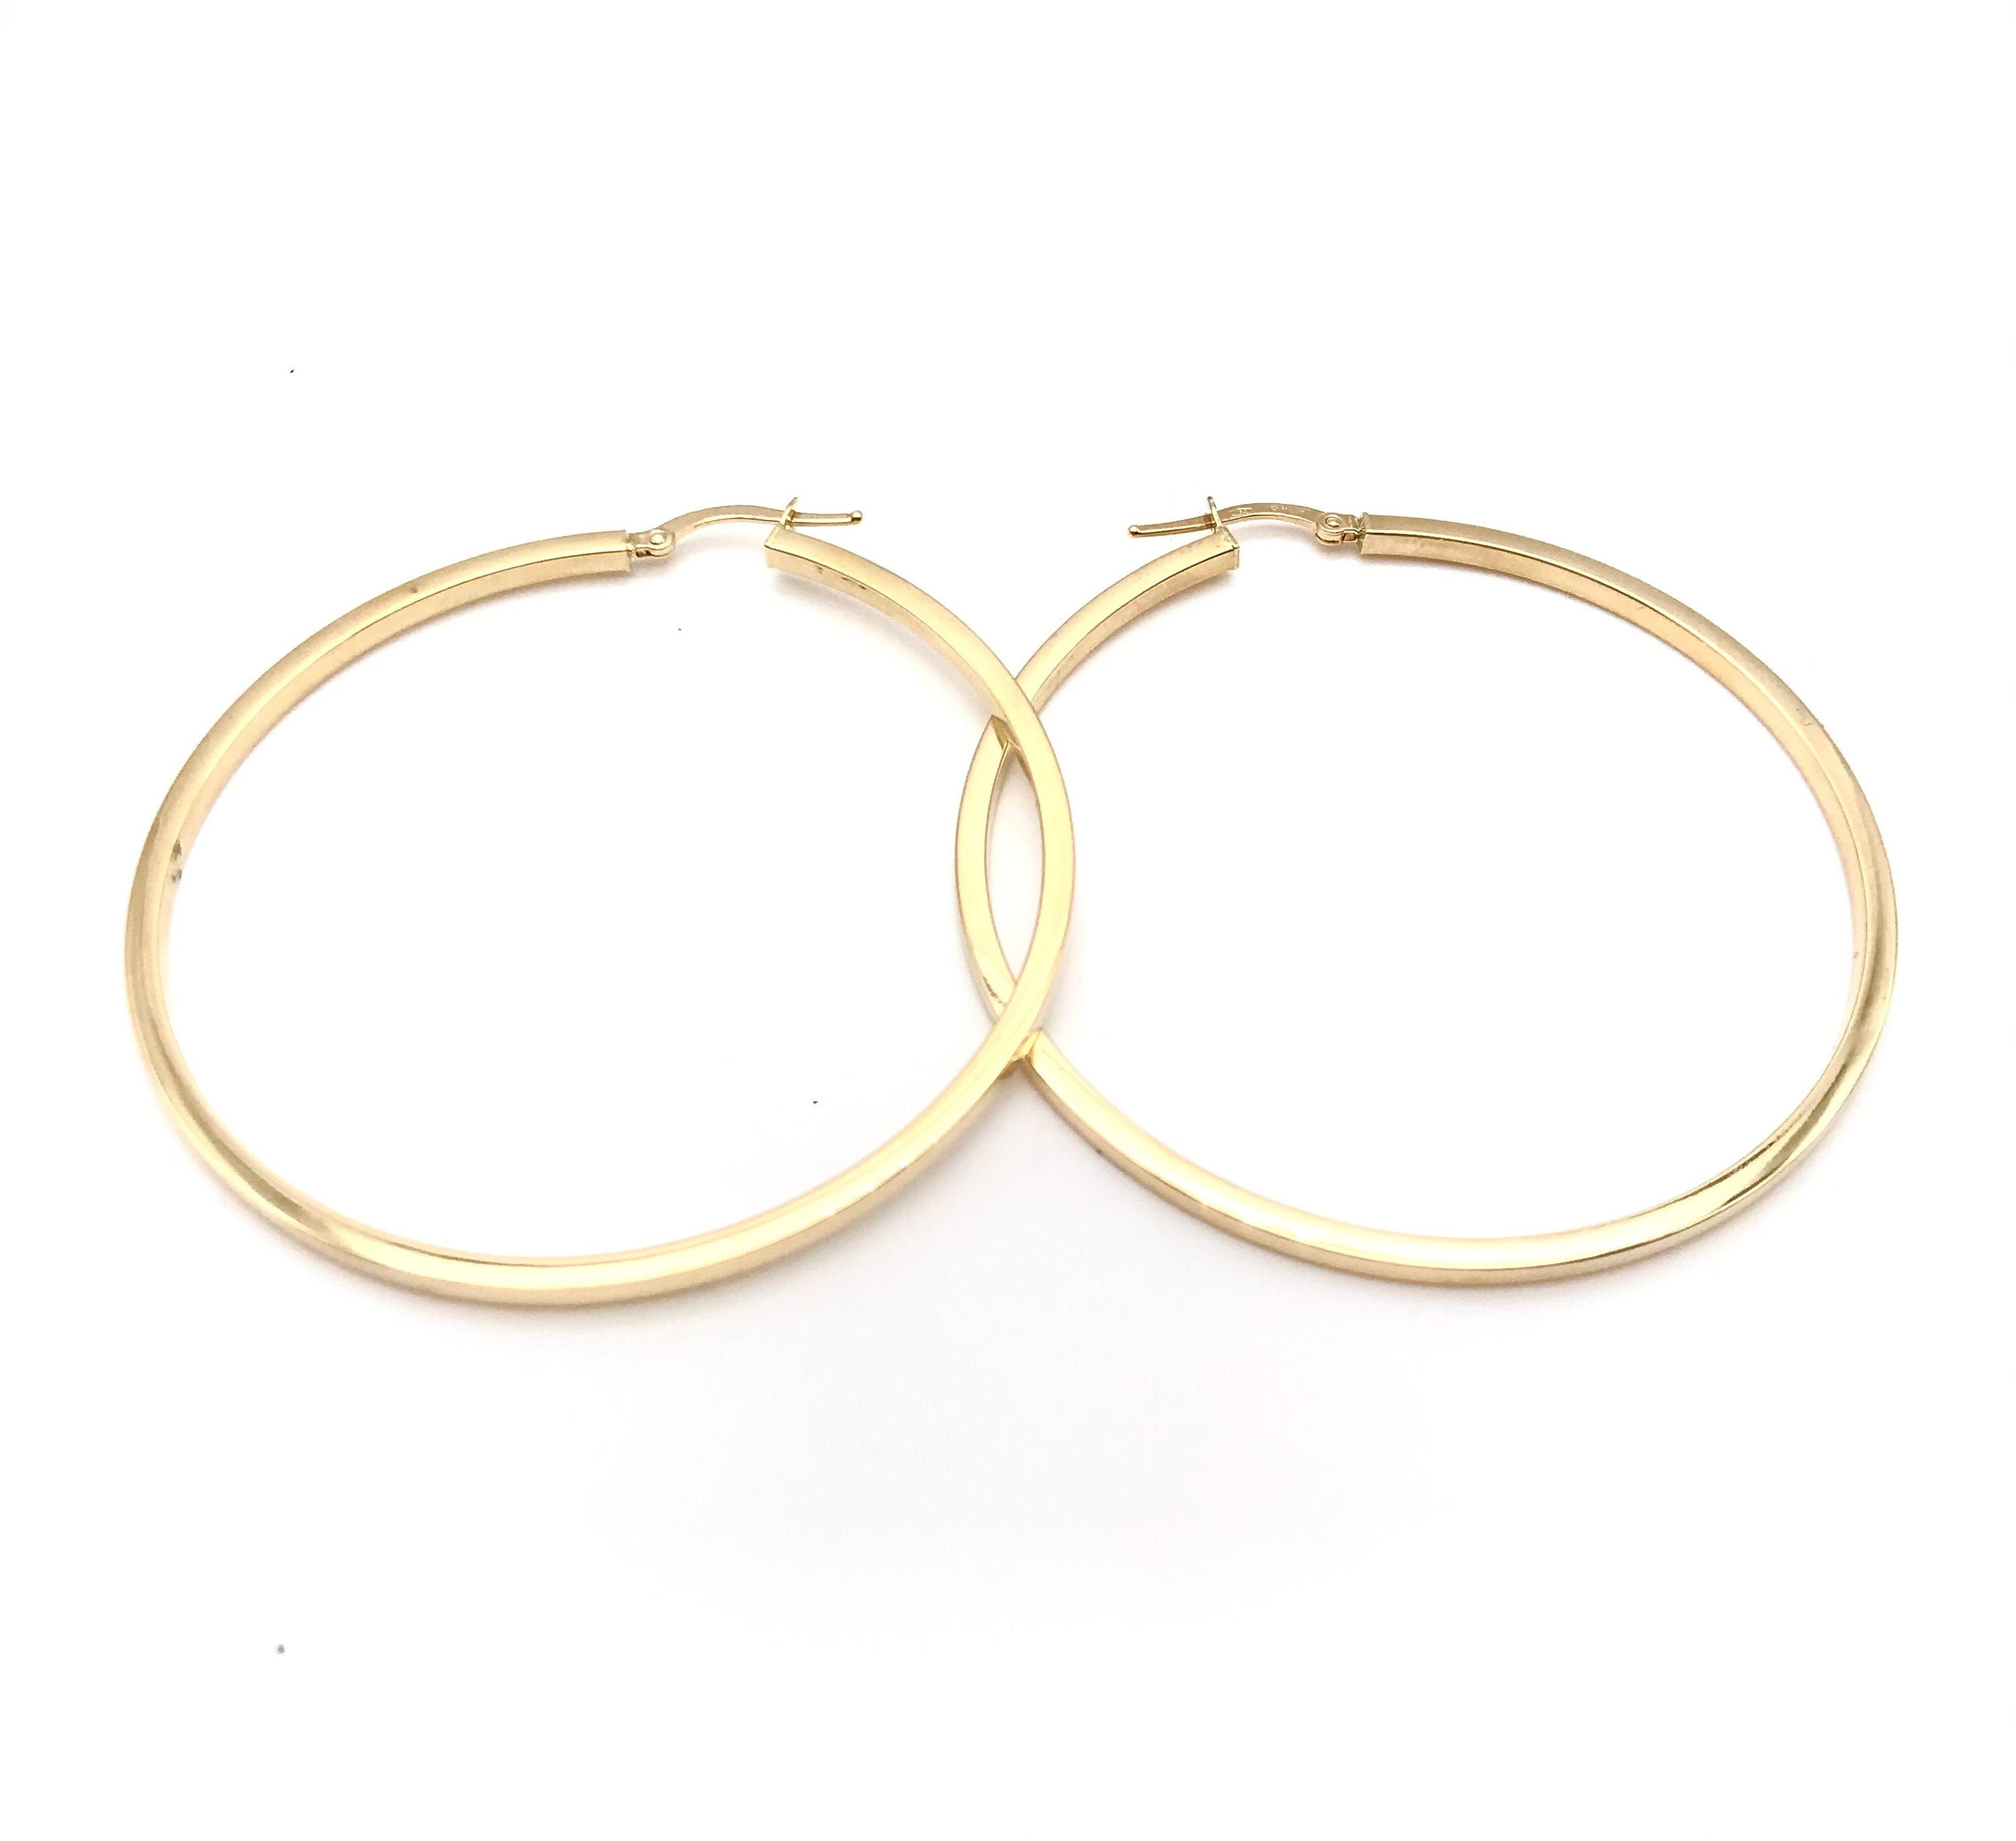 18K Gold Dainty Hoop Earrings Hoops Polished Large Italian Jewelry Gift For Her Made in Italy